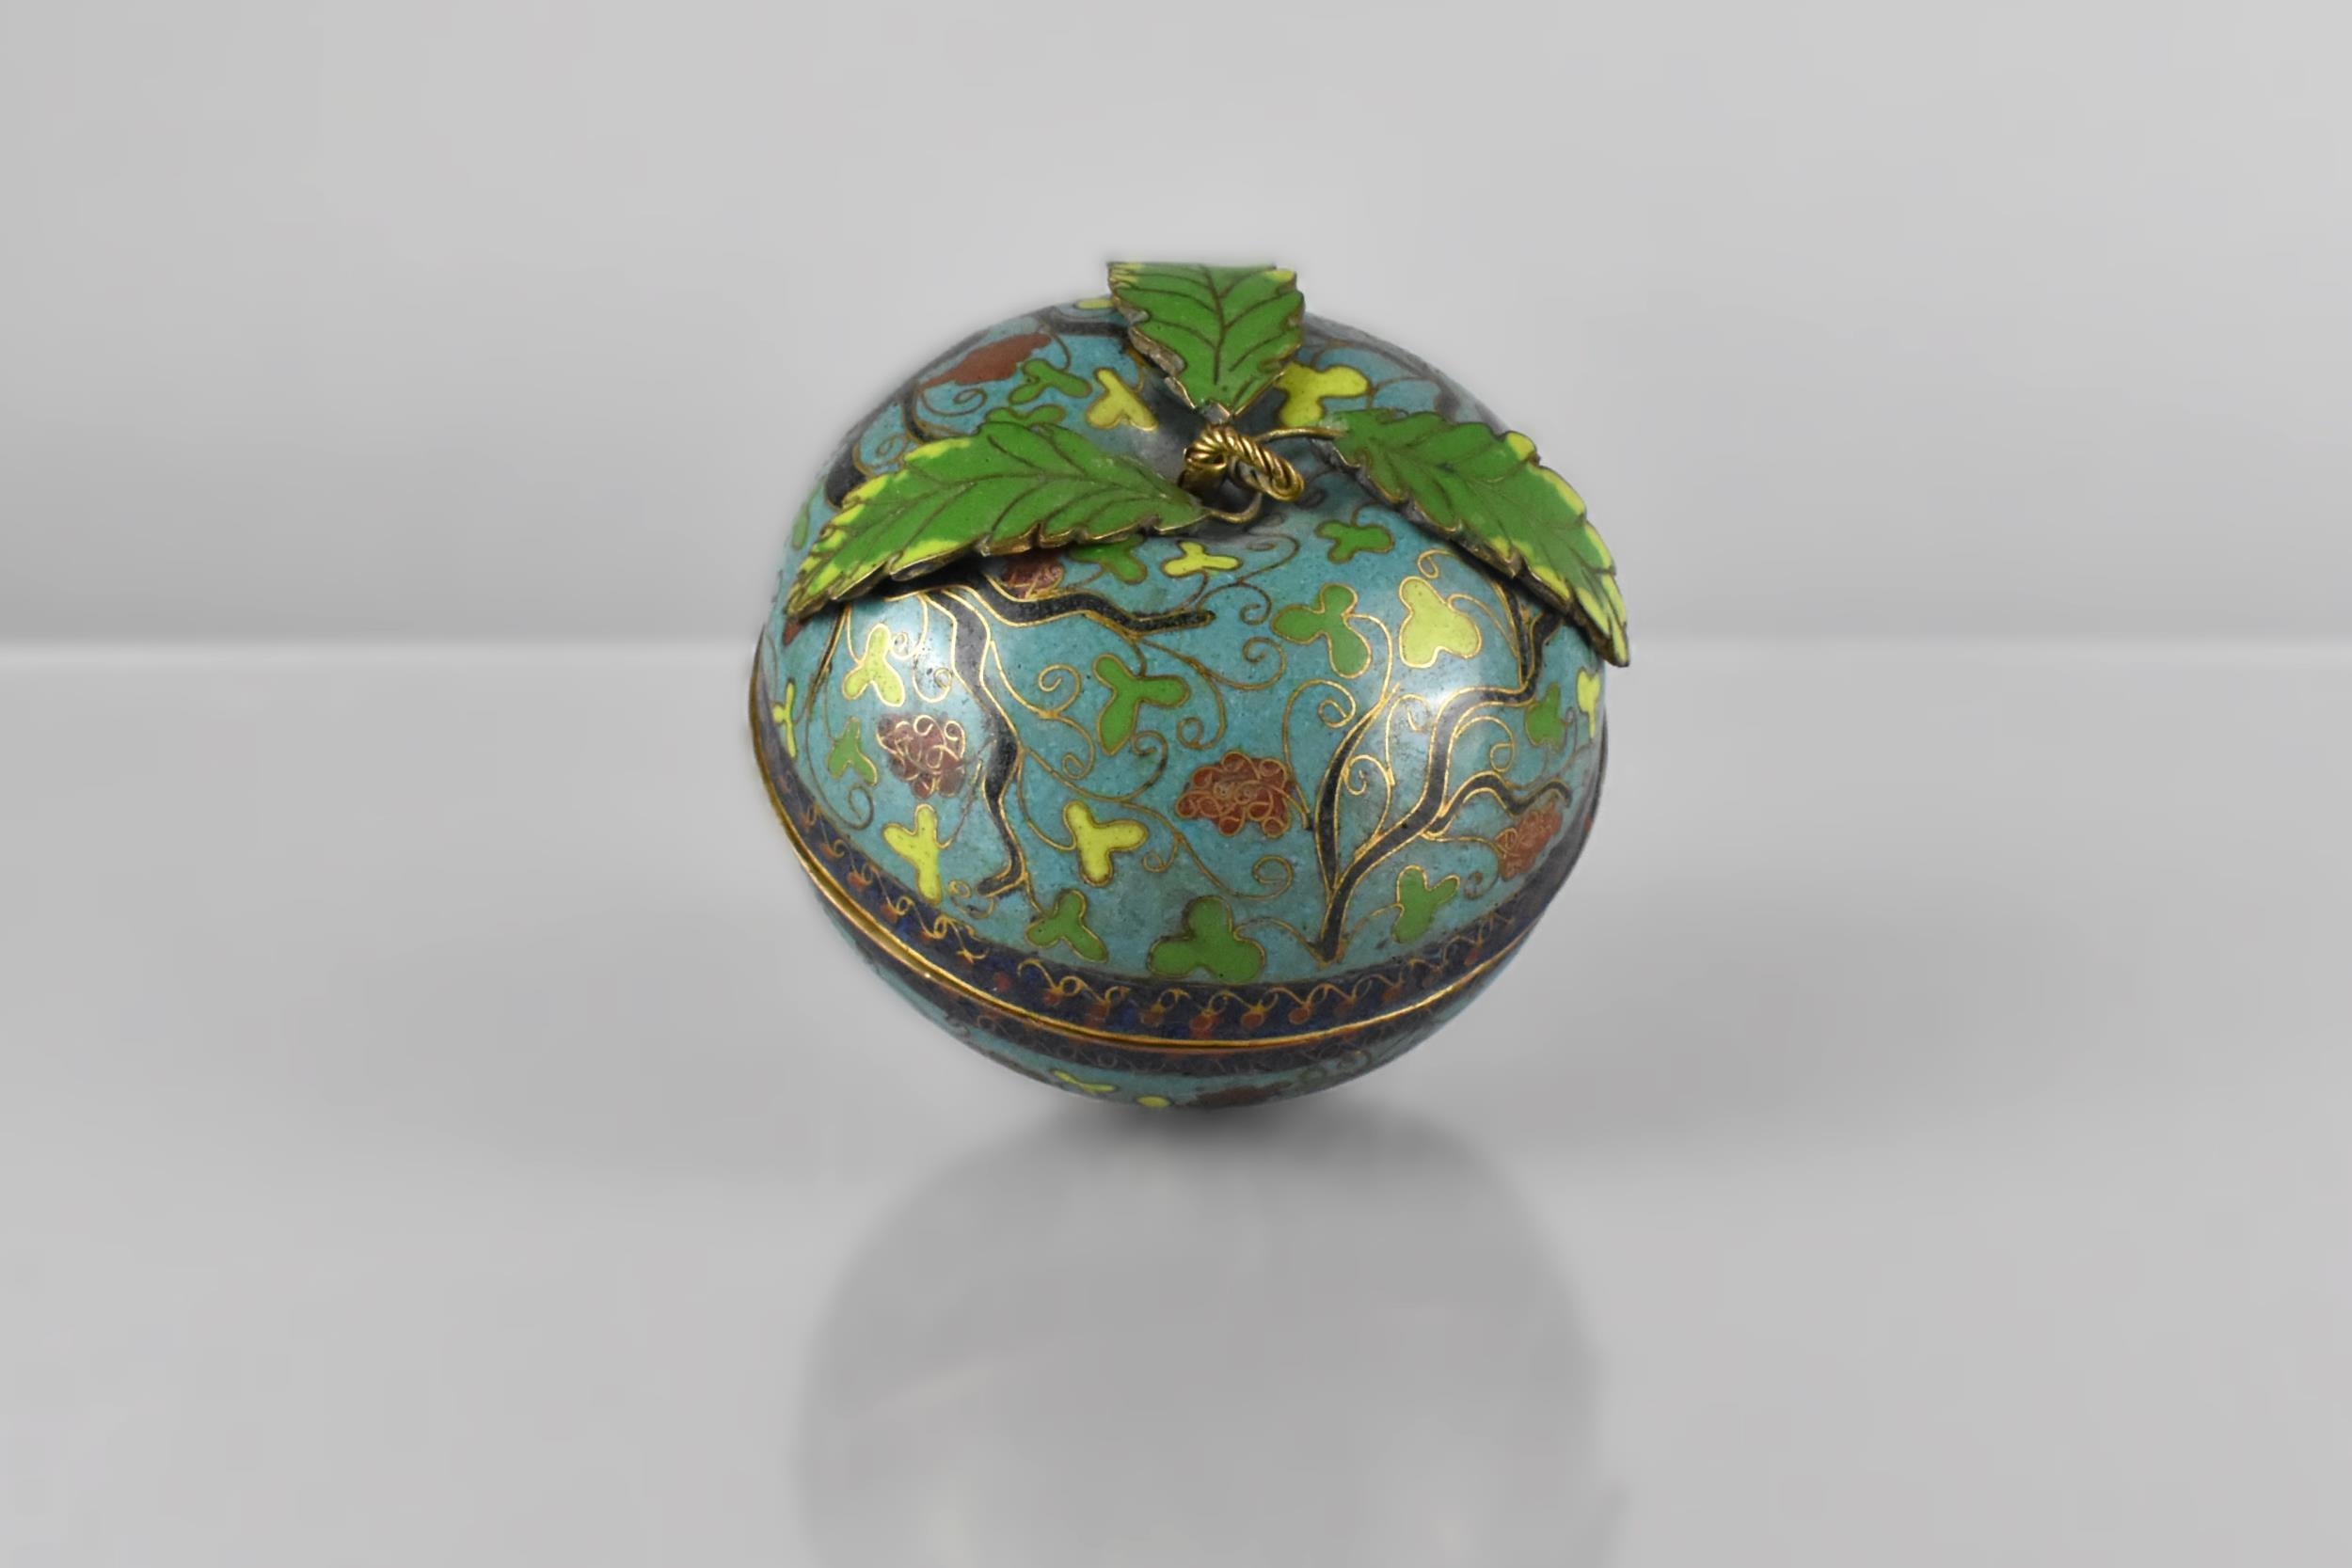 A Chinese Late Qing Dynasty Cloisonne Box in the Form of an Apple Decorated with Grape and Vines